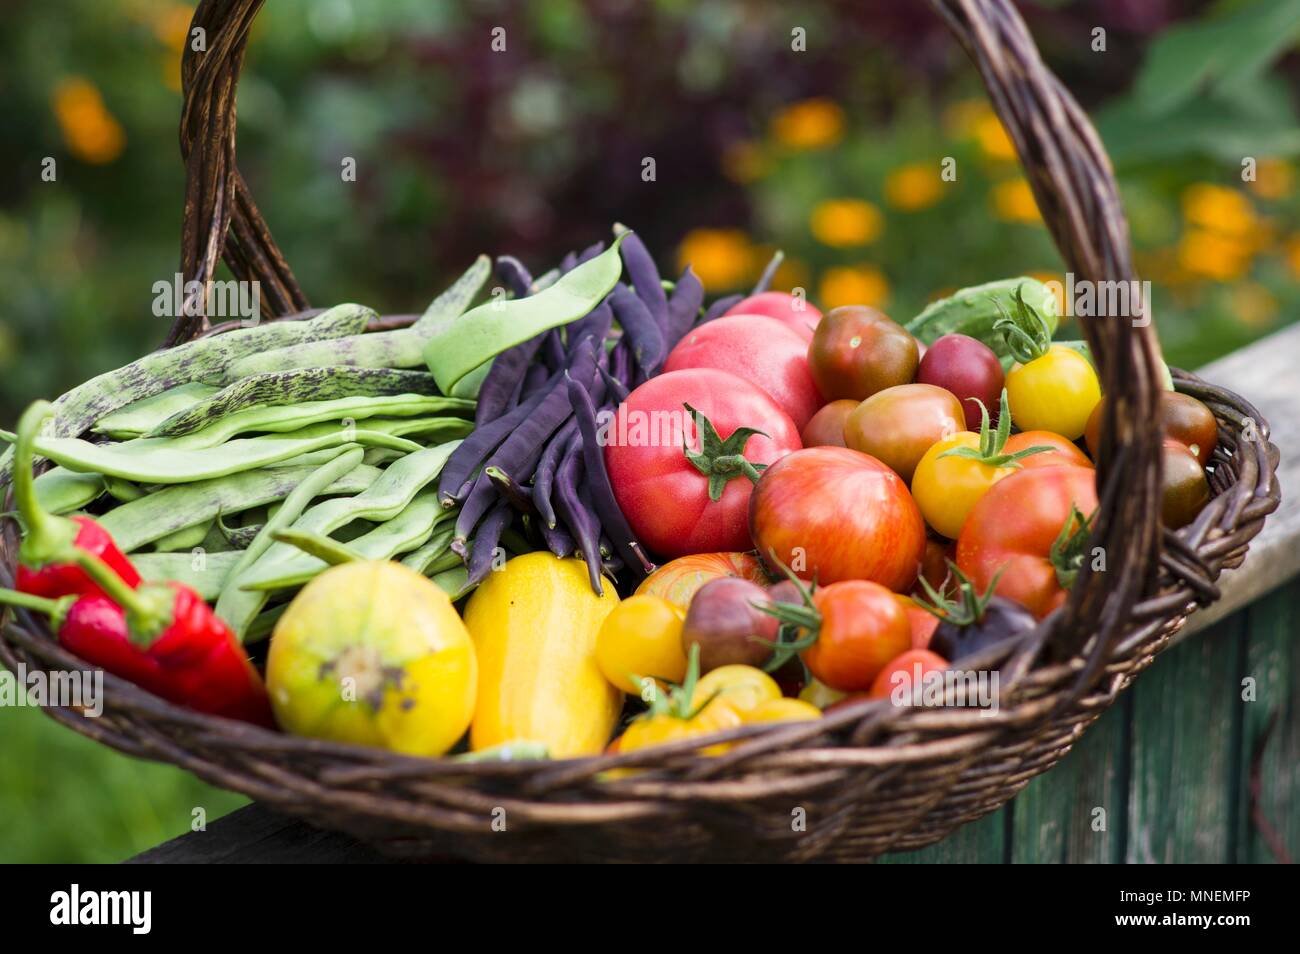 A large harvesting basket in a vegetable garden Stock Photo